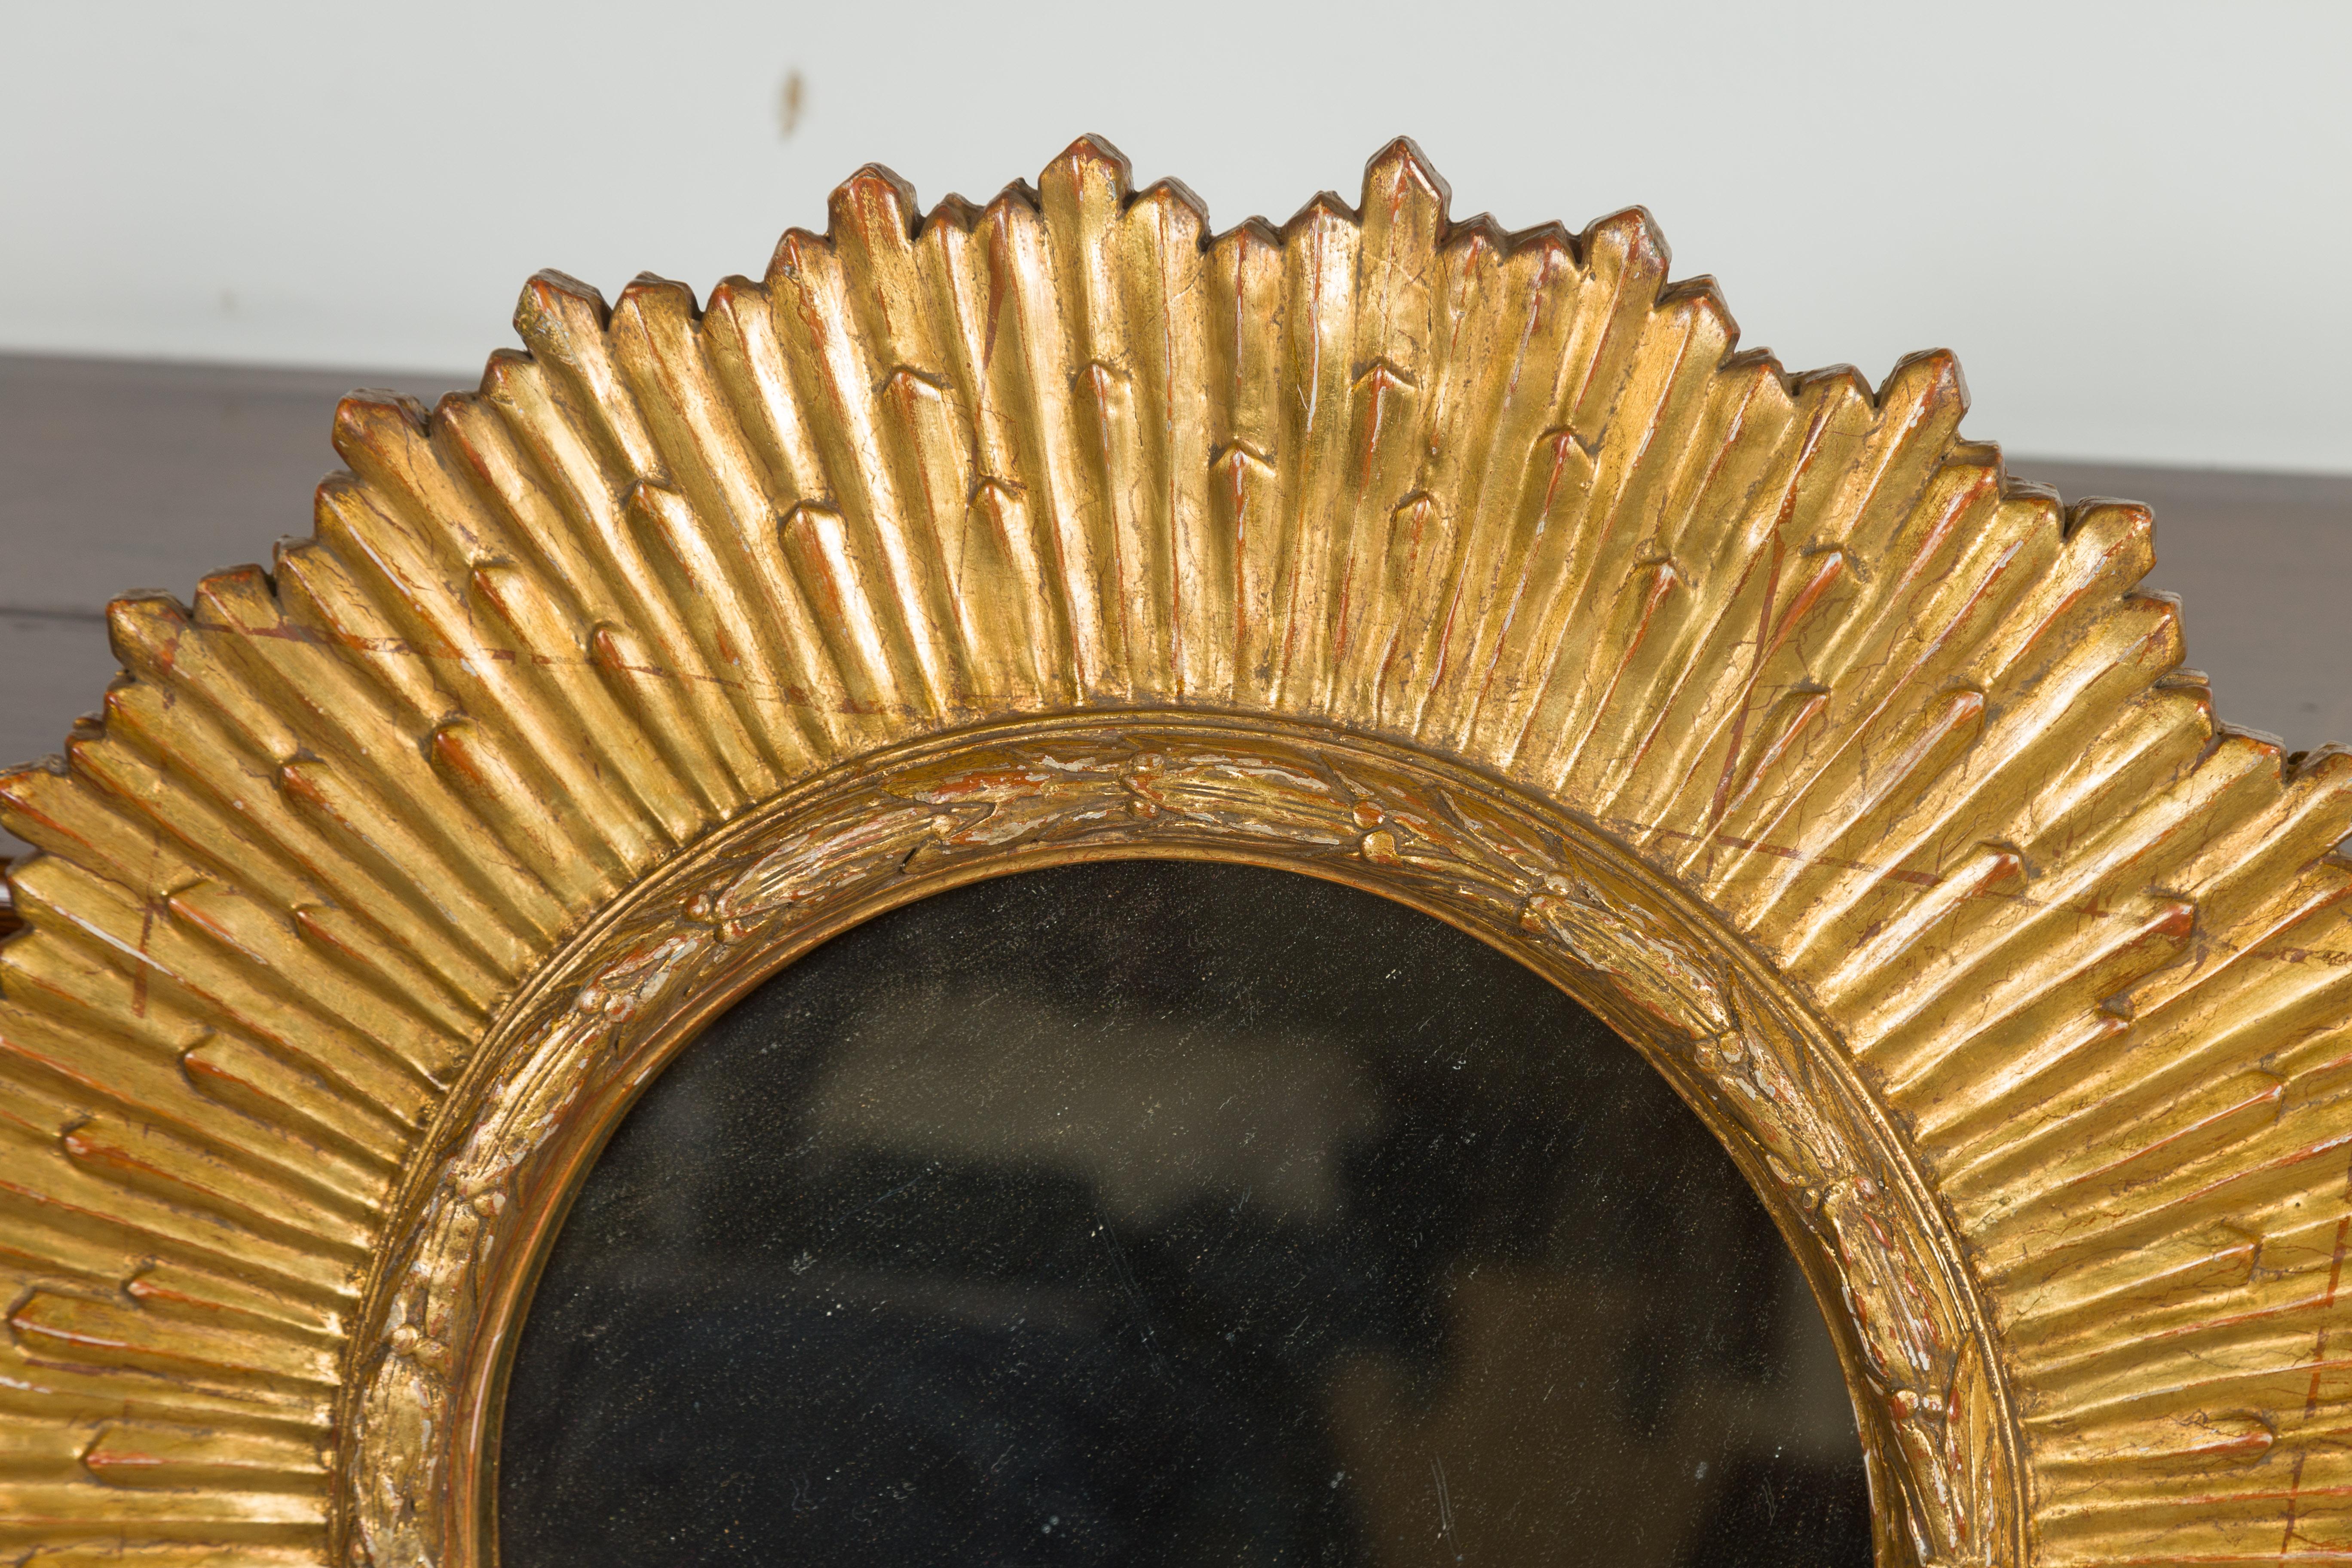 20th Century French Midcentury Giltwood Sunburst Mirror with Radiating Rays and Carved Frame For Sale